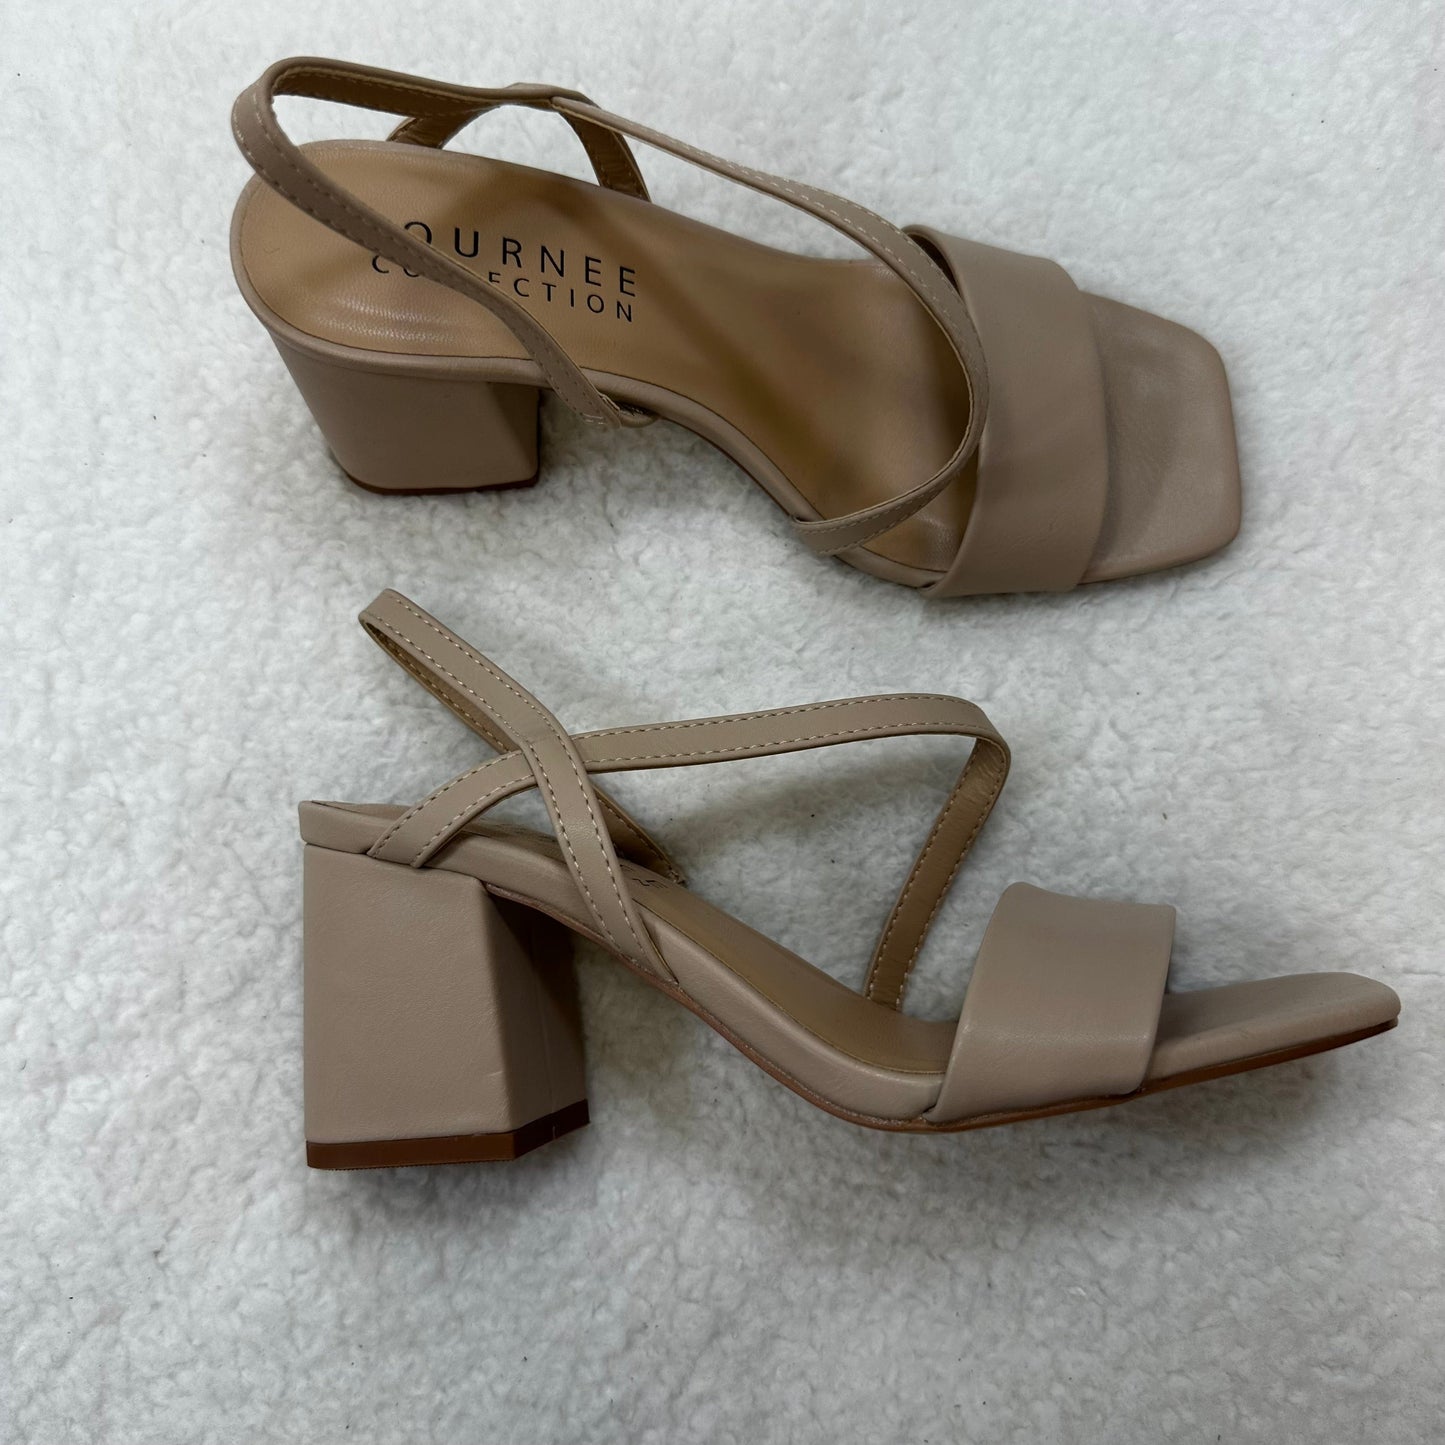 Nude Shoes Heels Block Cme, Size 6